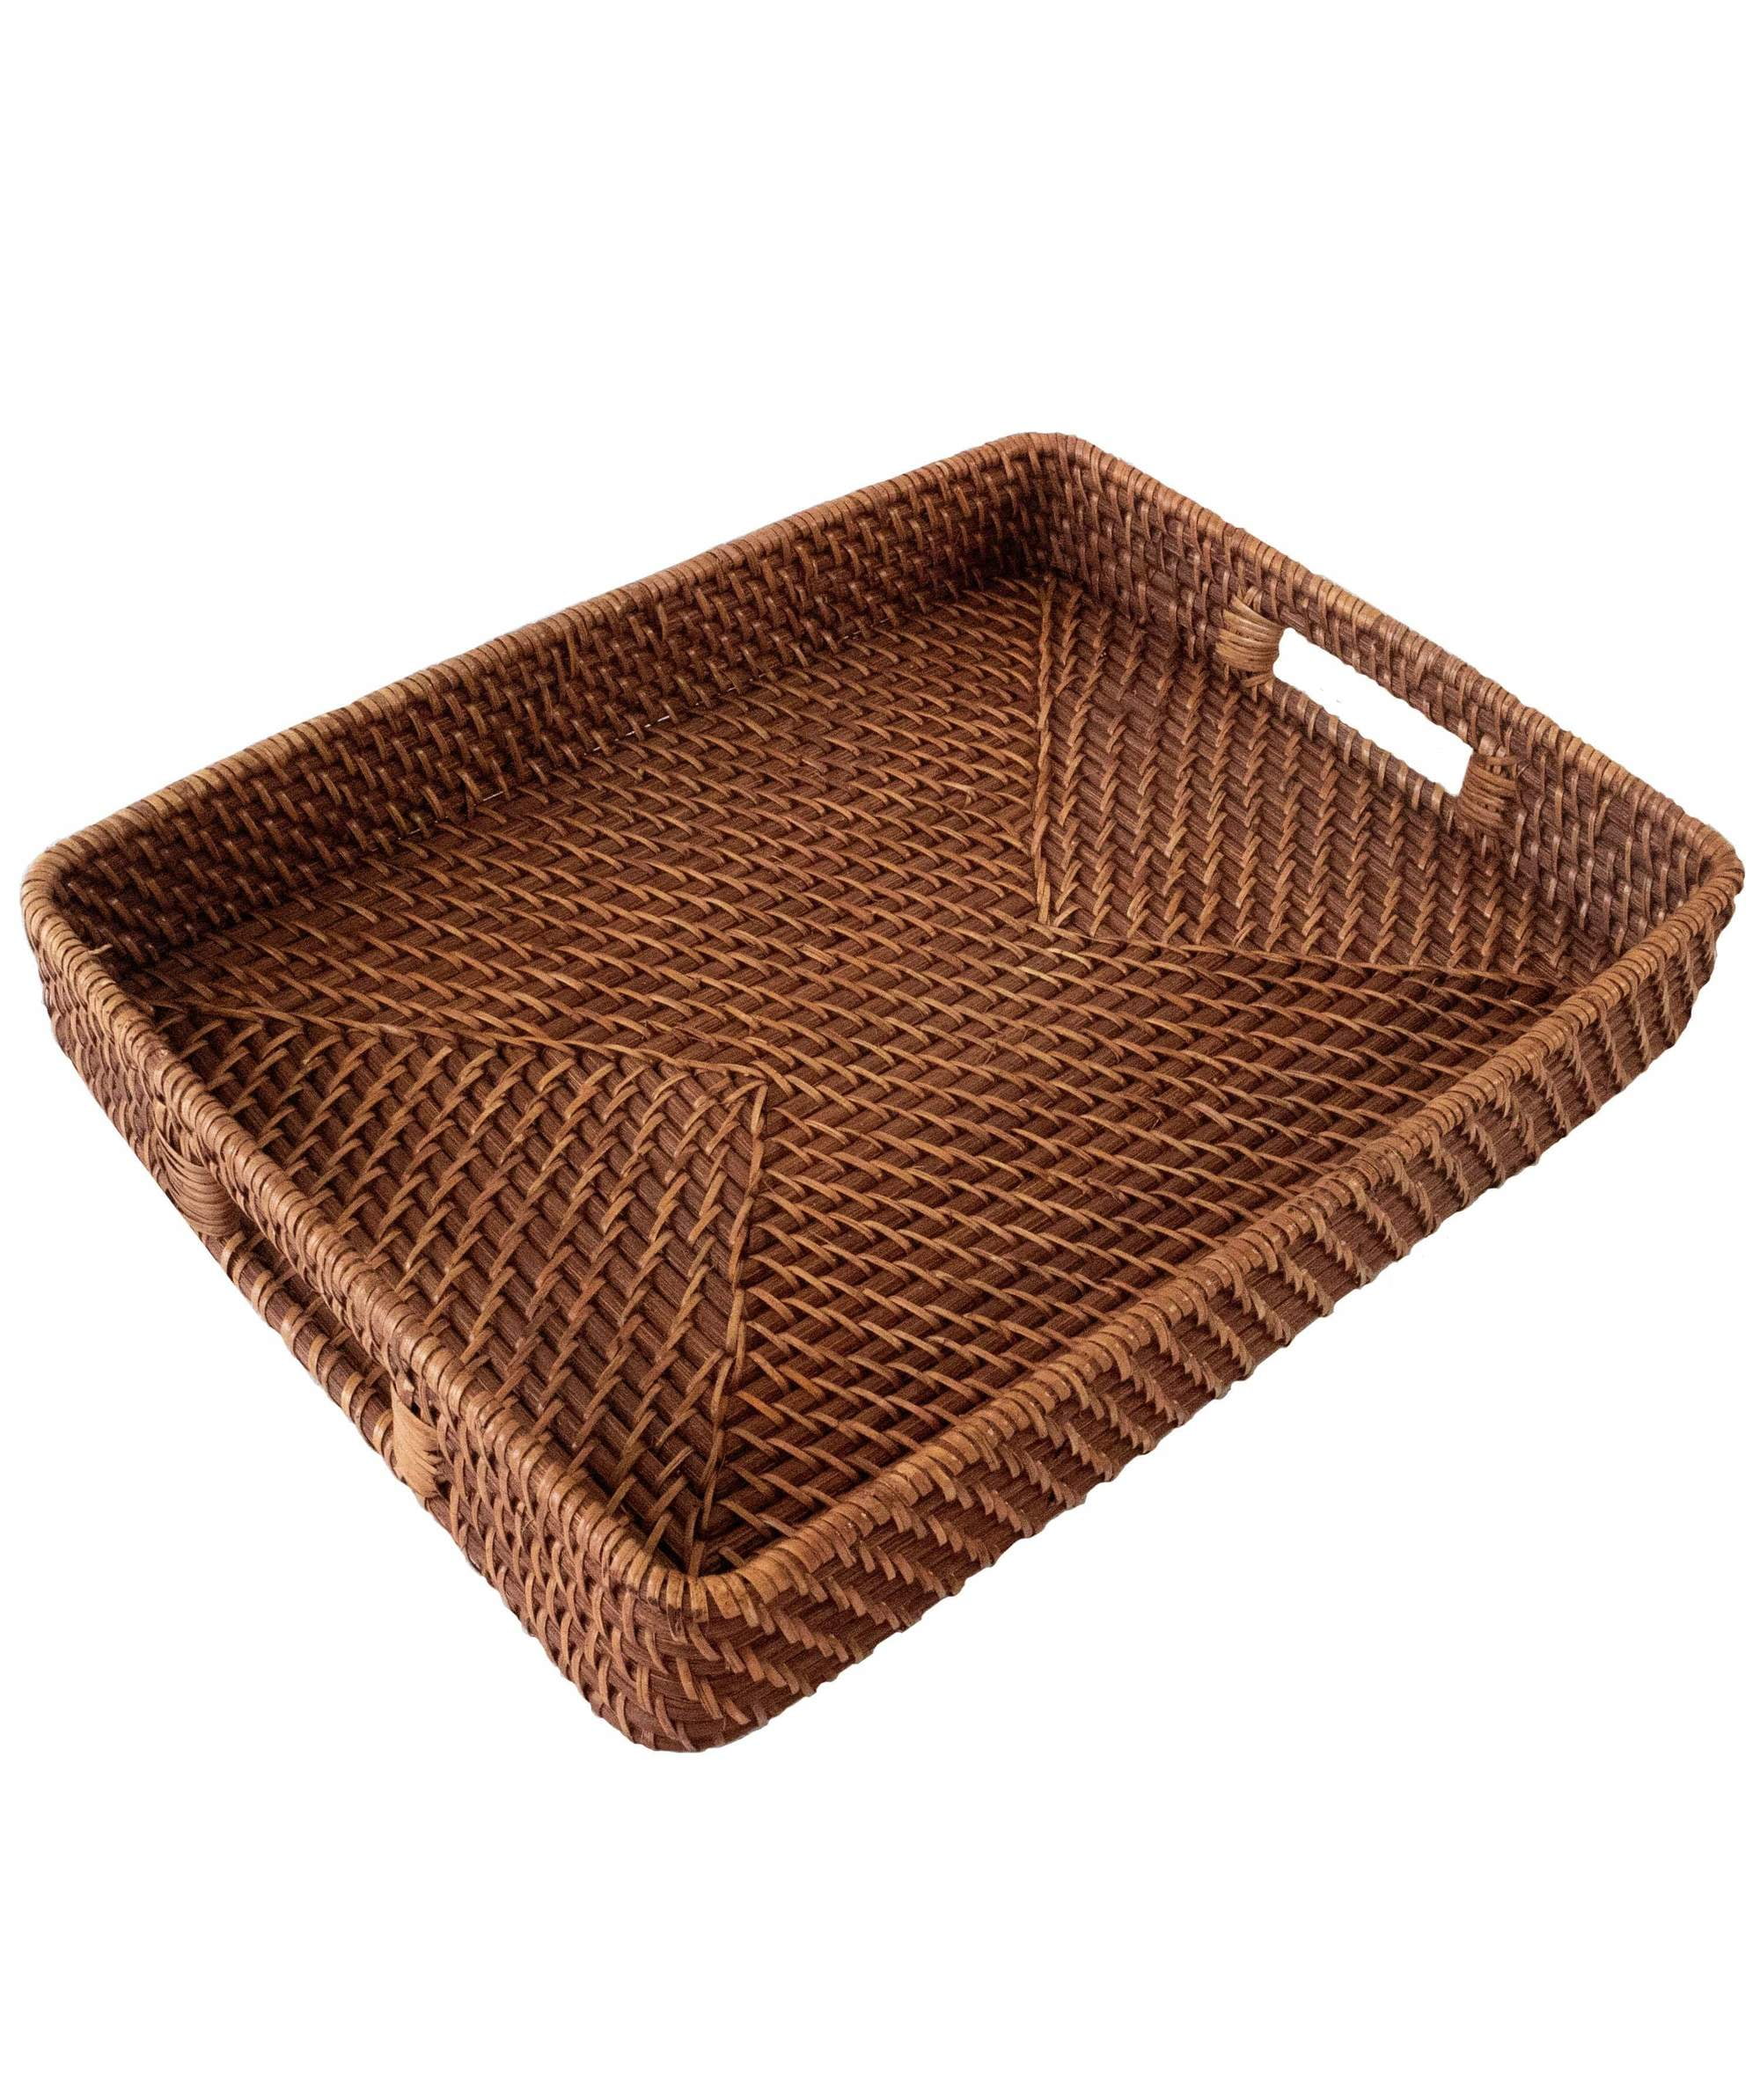 Wood Wicker Rattan Fruit Food Square Serving Tray Large 20 1/8" x 20 1/8" 